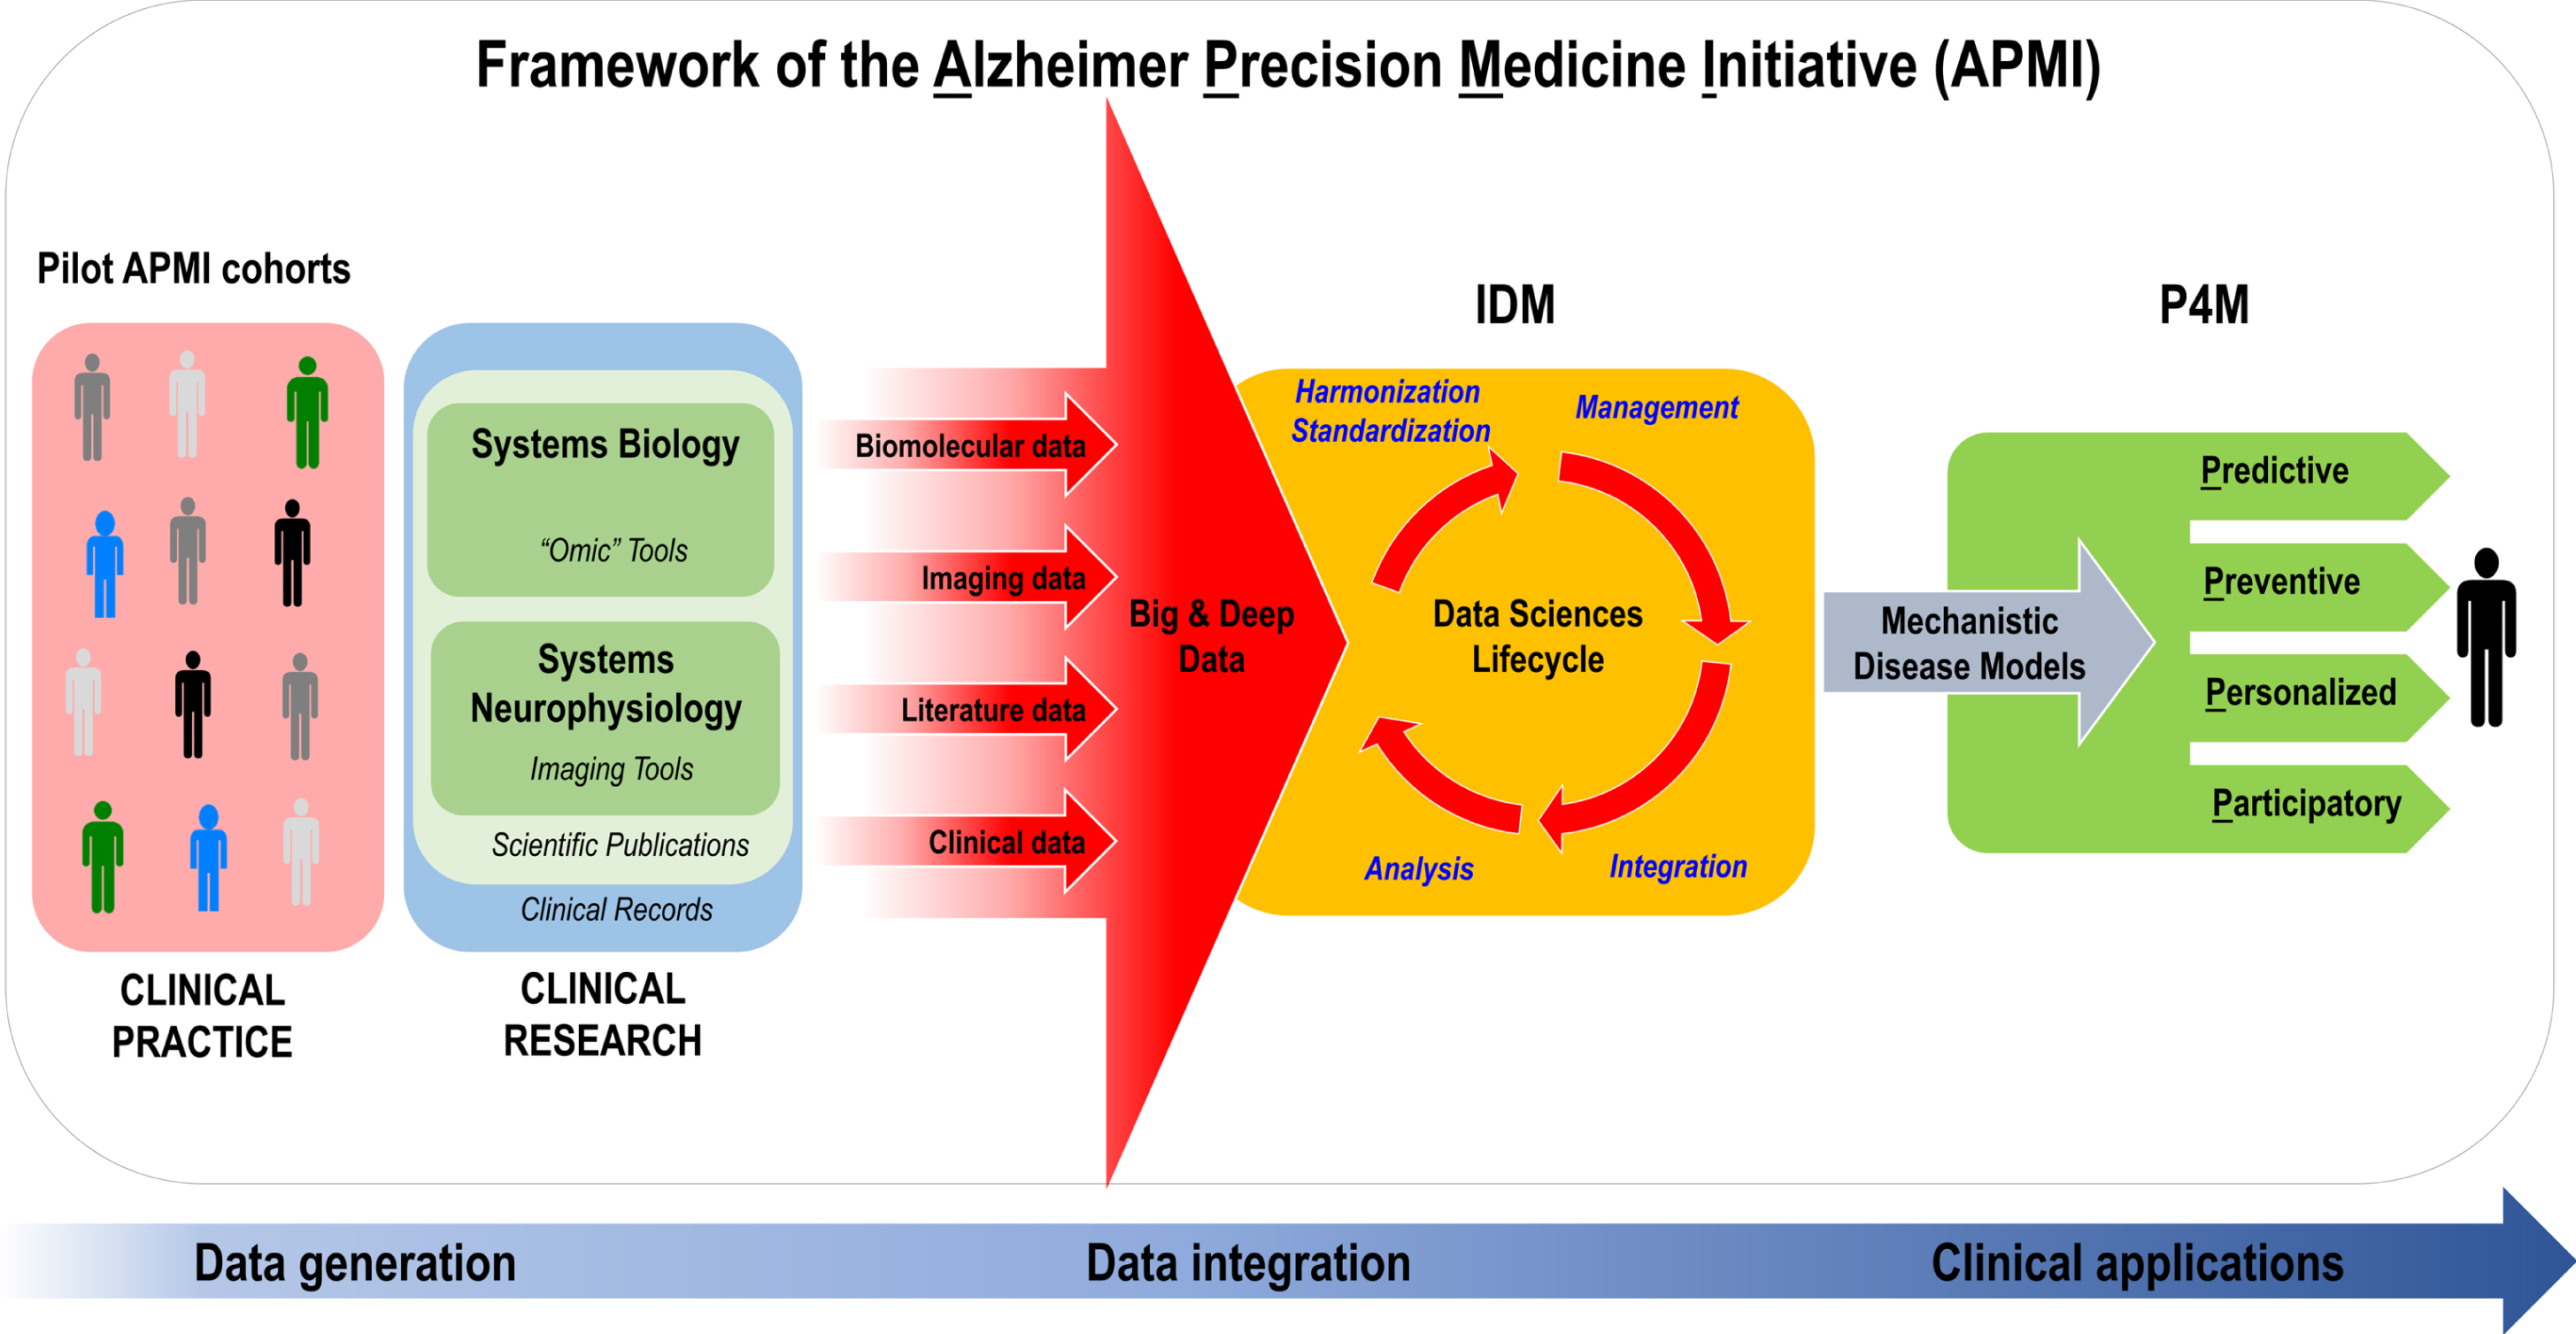 Translational bench-to-bedside data flow within the conceptual framework of the Alzheimer Precision Medicine Initiative (APMI). The IDM-based “Data Sciences Lifecycle” takes advantage of both data-driven and knowledge-driven approaches so that both quantitative data (biomolecular, neuroimaging/neurophysiological, and clinical data) and qualitative data (collected from scientific literature and on-line media)—generated through the application of systems biology and systems neurophysiology paradigms—are represented in a harmonized, standardized format to be prepared for proper management within an integrative computational infrastructure. Indeed, the resulting heterogeneous, multidimensional big and deep data are harmonized, standardized, and integrated via computational and data science methods in the form of mechanistic disease models, according to the IDM conception. Disease-specific integrative computational models play a key role in the IDM paradigm and represent the foundations for “actionable” P4M measures in the area of AD and other ND. As a result, the integrative disease models are anticipated to support decision making for: 1) early diagnosis of brain disease progression with mechanistic biomarkers (predictive), 2) screening populations and stratifying individuals at high risk of developing ND based on mechanistic co-morbidities in order to reduce the likelihood of disease and disability (preventive), 3) tailoring treatment to the right patient population at the right time (personalized), and 4) optimizing “actionable” plans for the benefit of patients based on patient-oriented information gathered in EHRs and on patients’ feedback reported in social media. Internet has greatly enabled the participation of individual patients in the healthcare through sharing their experiences in various social media and other online resources (participatory). The output is anticipated to be an “actionable” model that permits the prediction of the trajectory of individual patient-centric detection or treatment within the implementation of the P4M paradigm. APMI, Alzheimer Precision Medicine Initiative; EHRs, electronic health records; IDM, integrative disease modeling; ND, neurodegenerative diseases; P4M, Predictive, Preventive, Personalized, Participatory Medicine. Modified from [21].